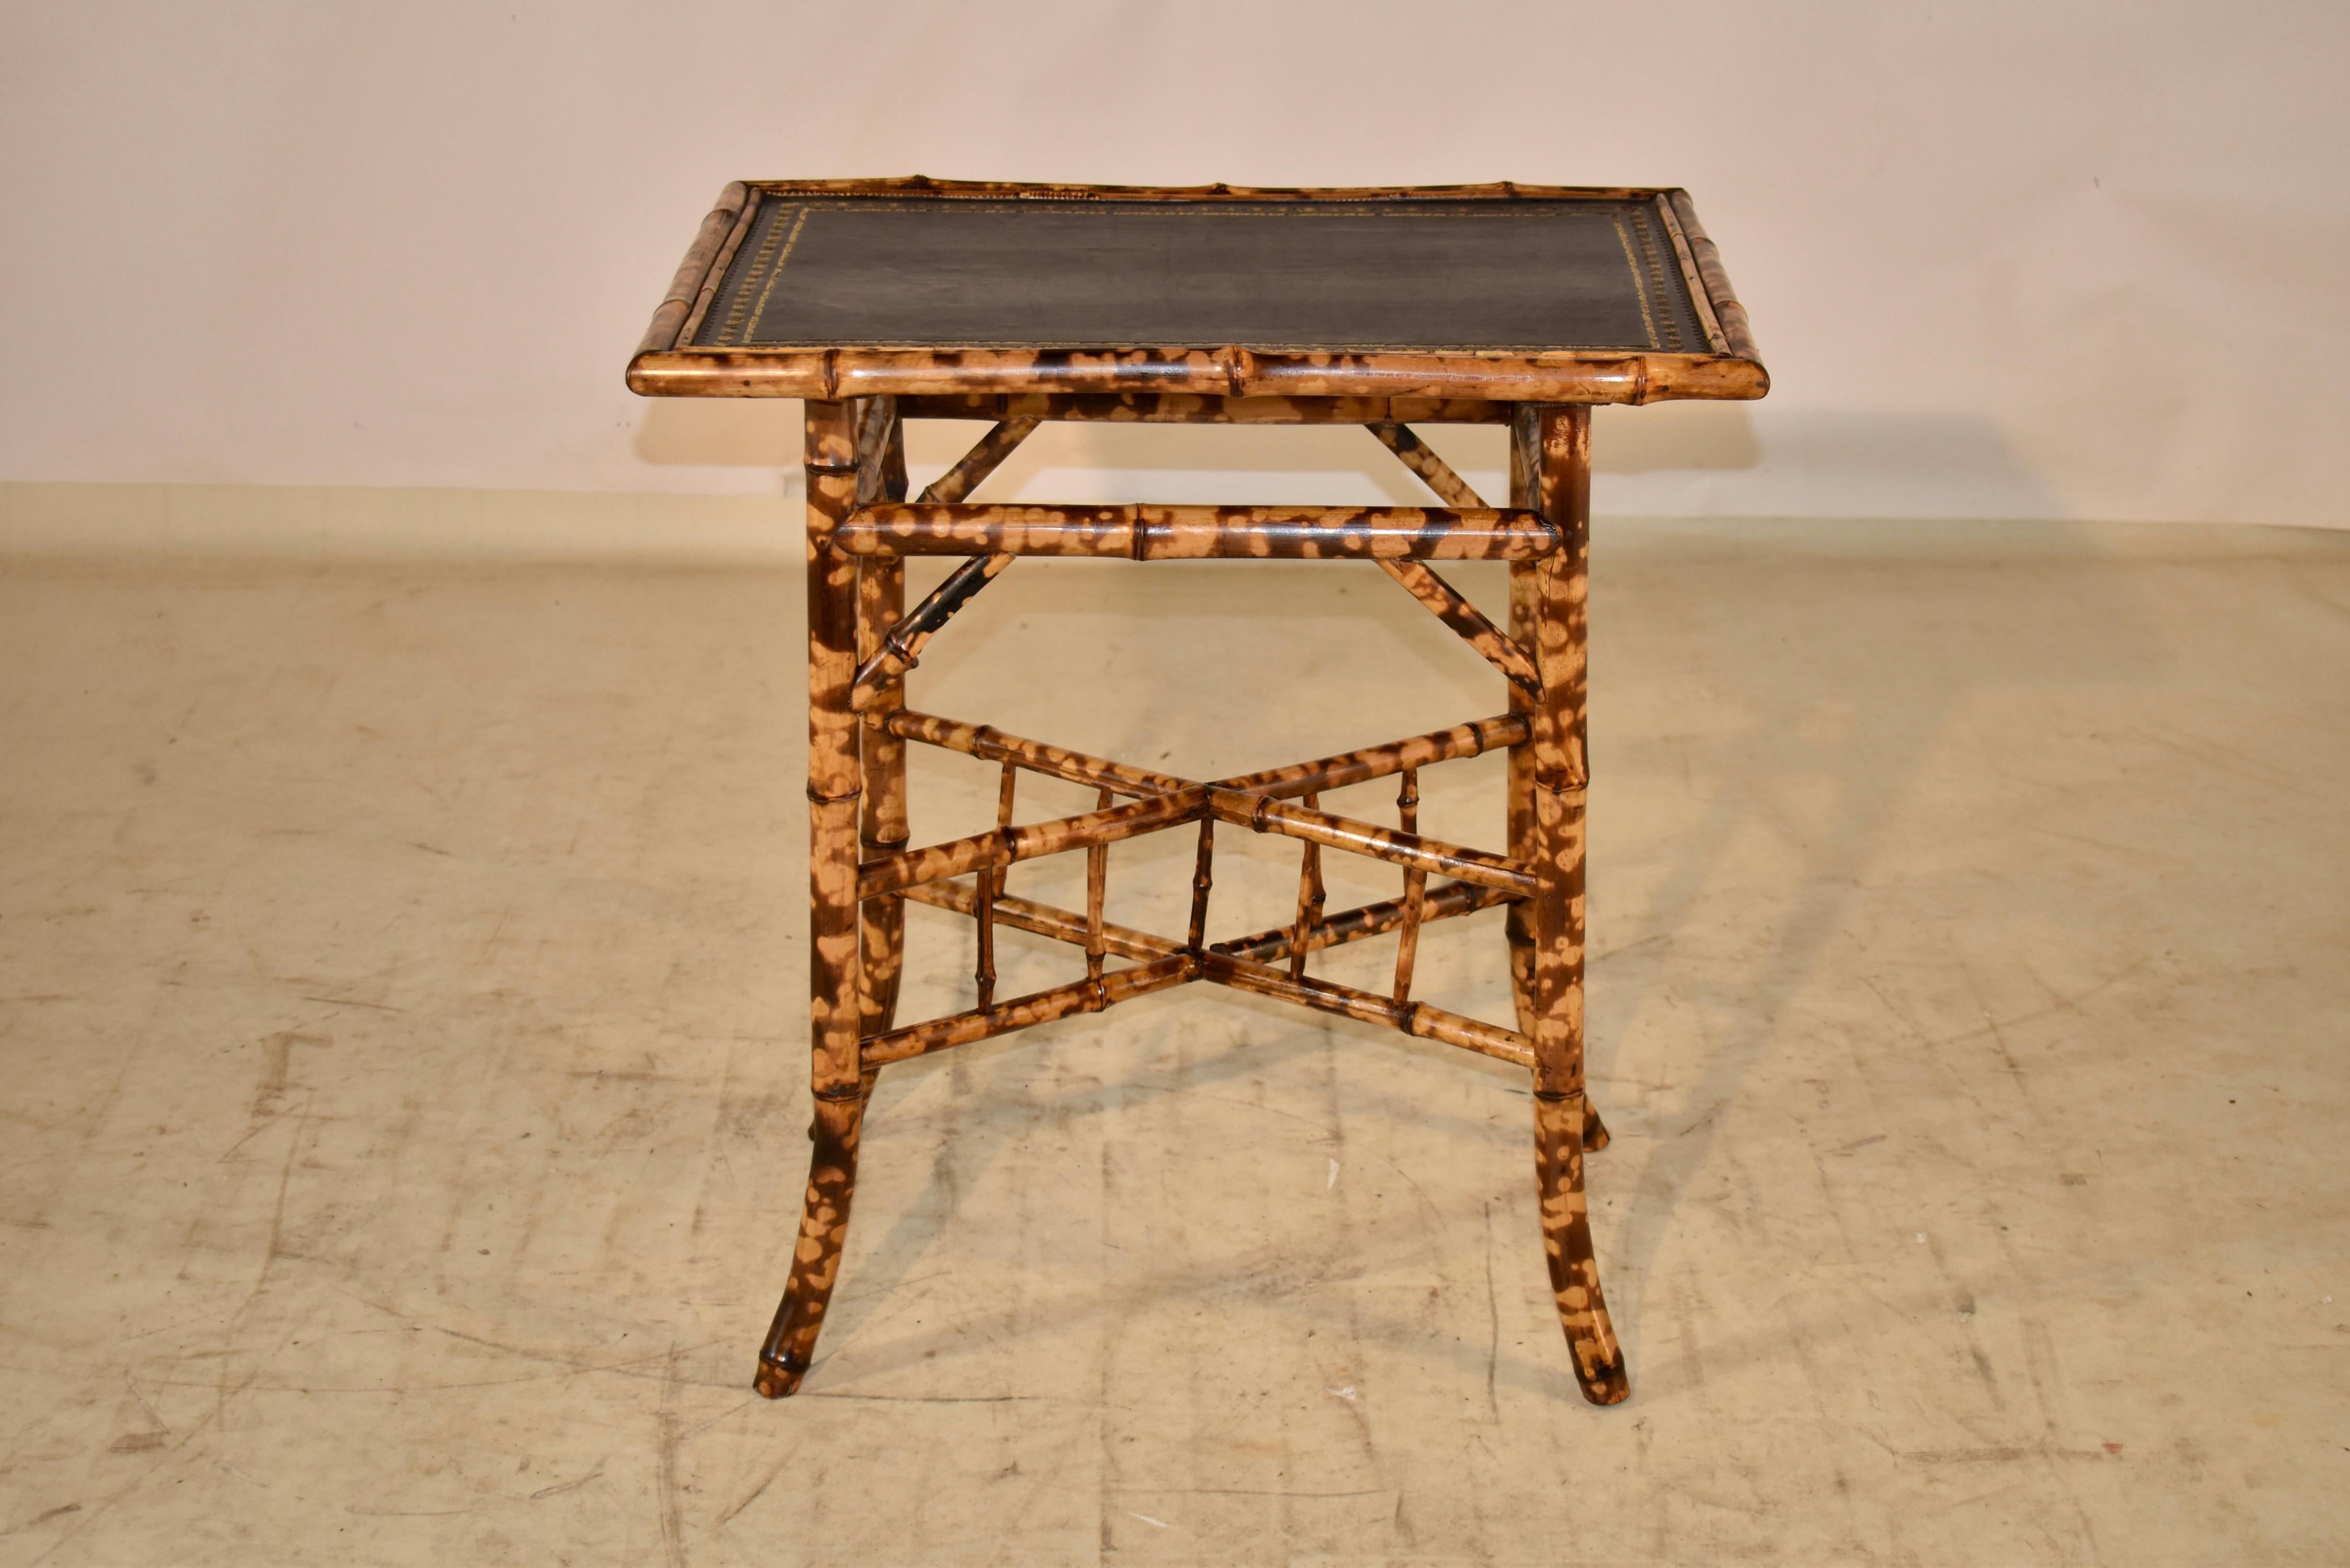 19th century tortoise bamboo side table from France. The top has been covered in black leather with a hand tooled edging. The base of the table is amazing and is supported on splayed legs, joined by vertical cross stretchers with spindles. This is a